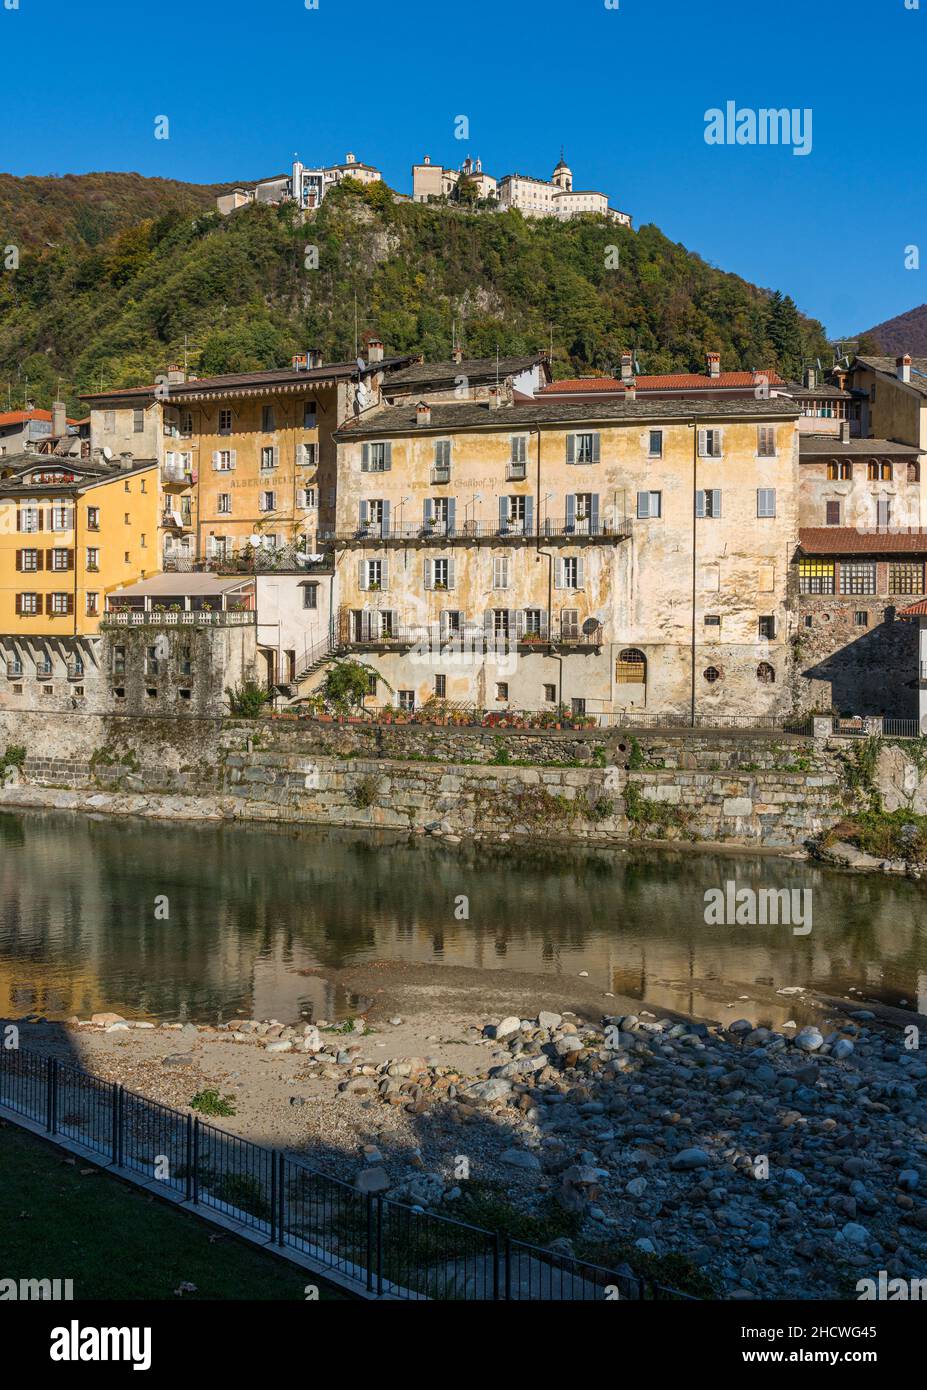 The beautiful village of Varallo, during fall season, in Valsesia (Sesia Valley). Province of Vercelli, Piedmont, Italy. Stock Photo